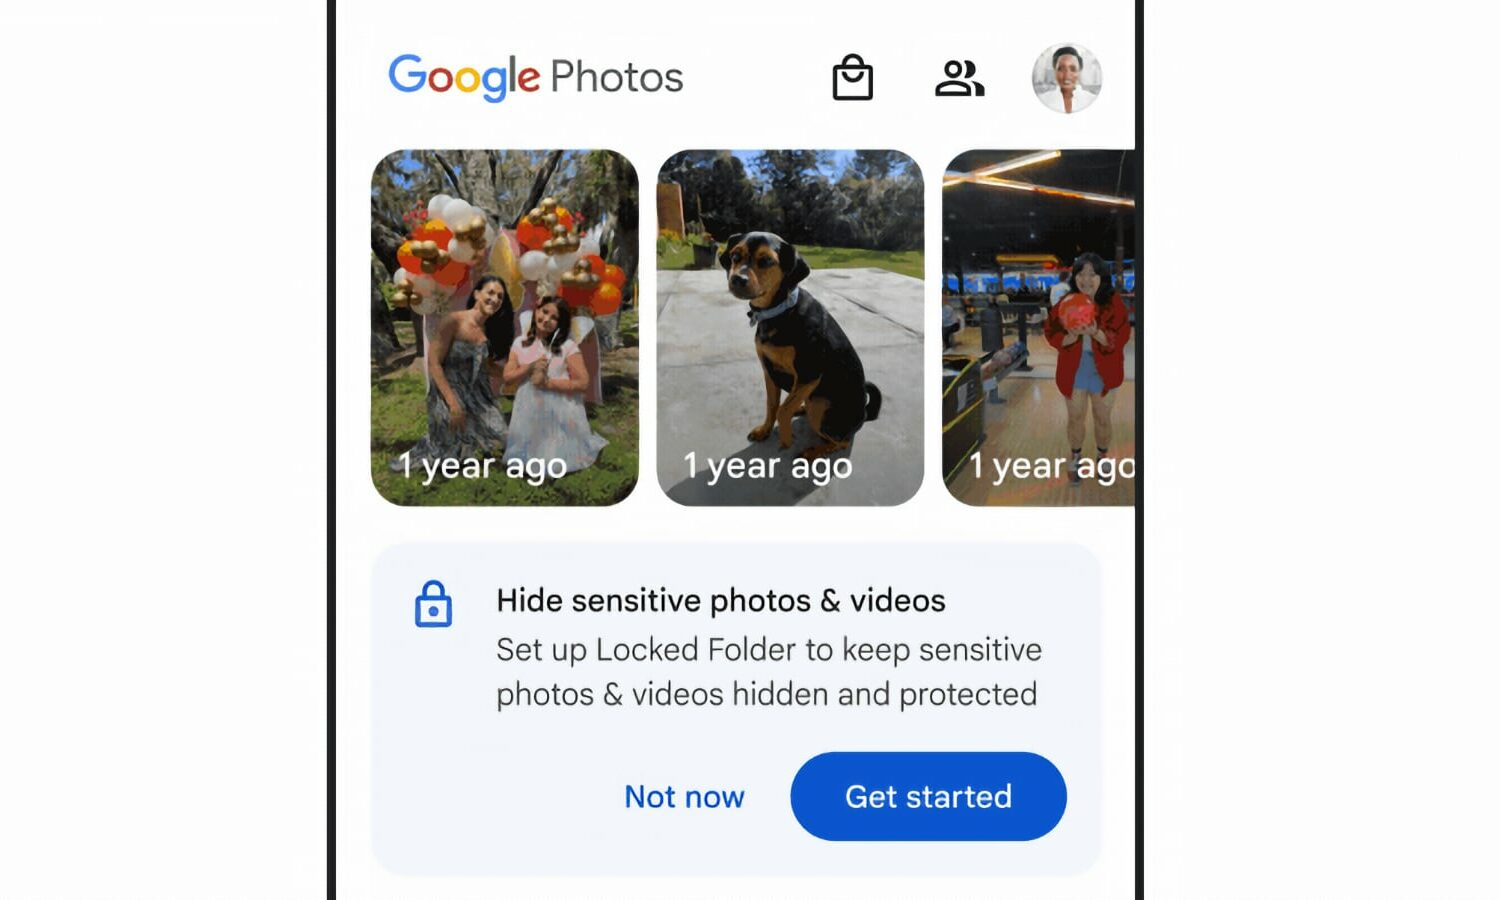 Prompt in the Google Photos app to turn on the Locked Folder feature